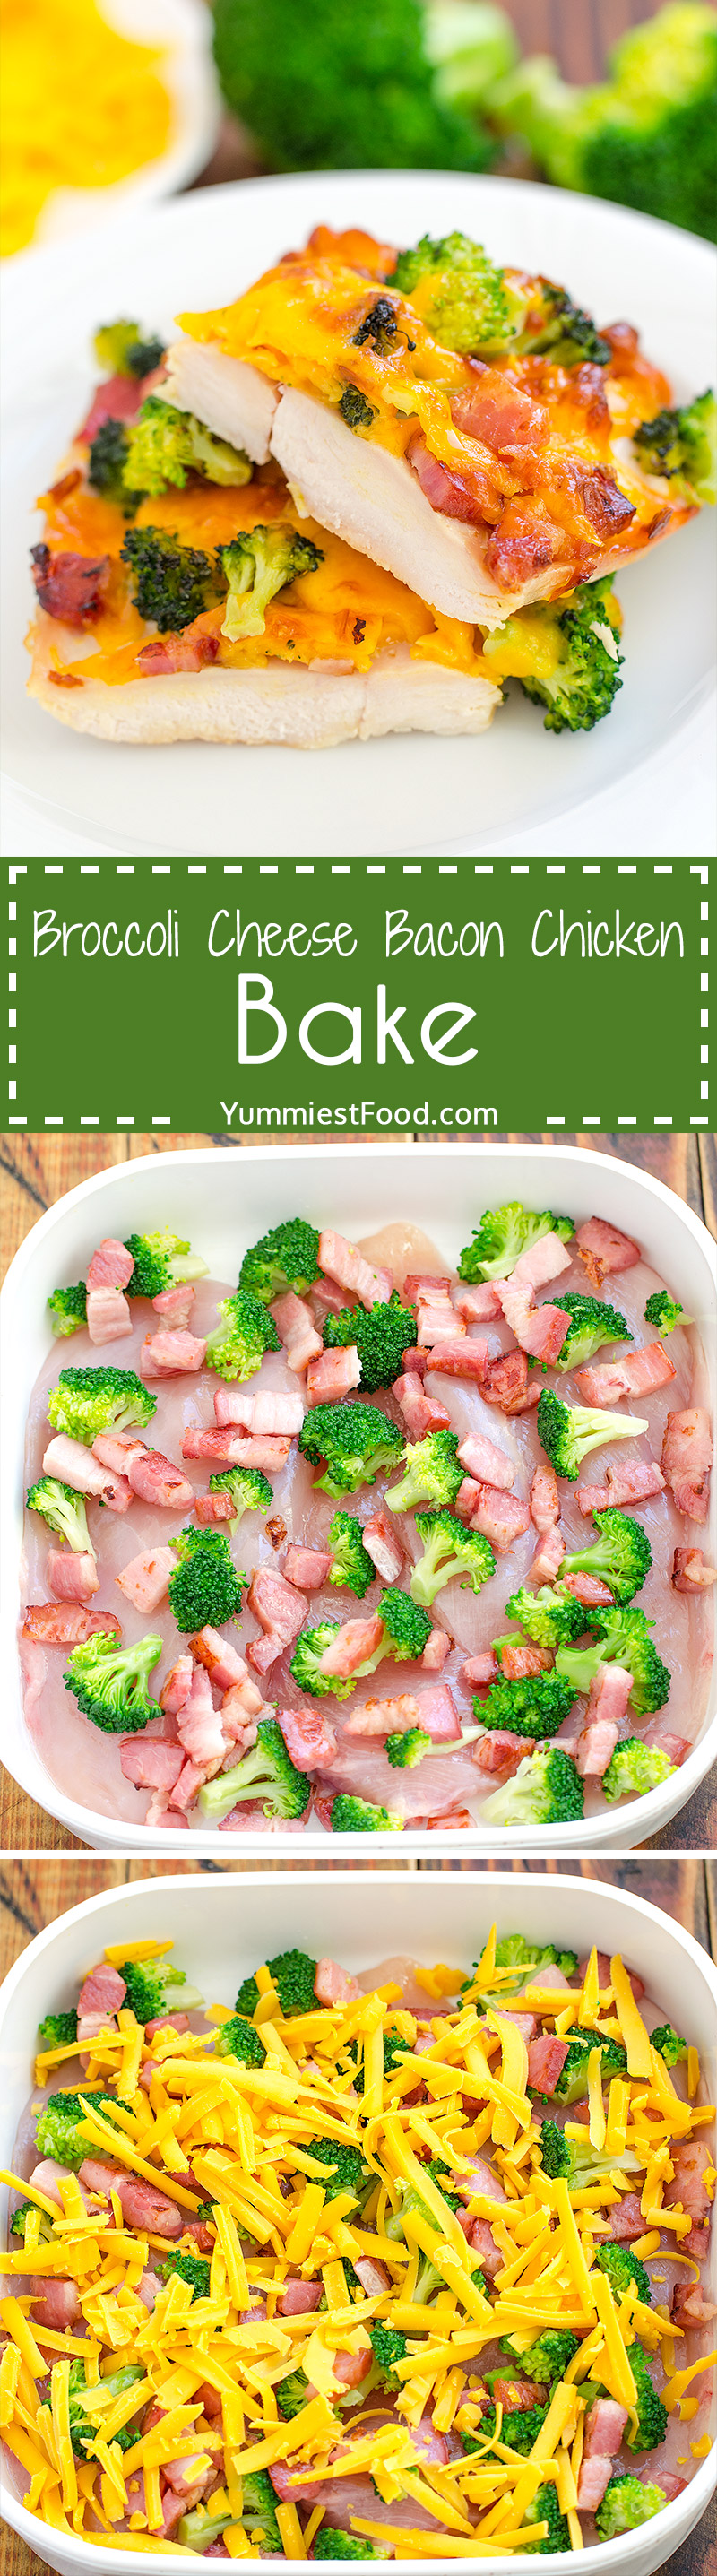 BROCCOLI CHESSE BACON CHICKEN - simple and easy meal for whole family